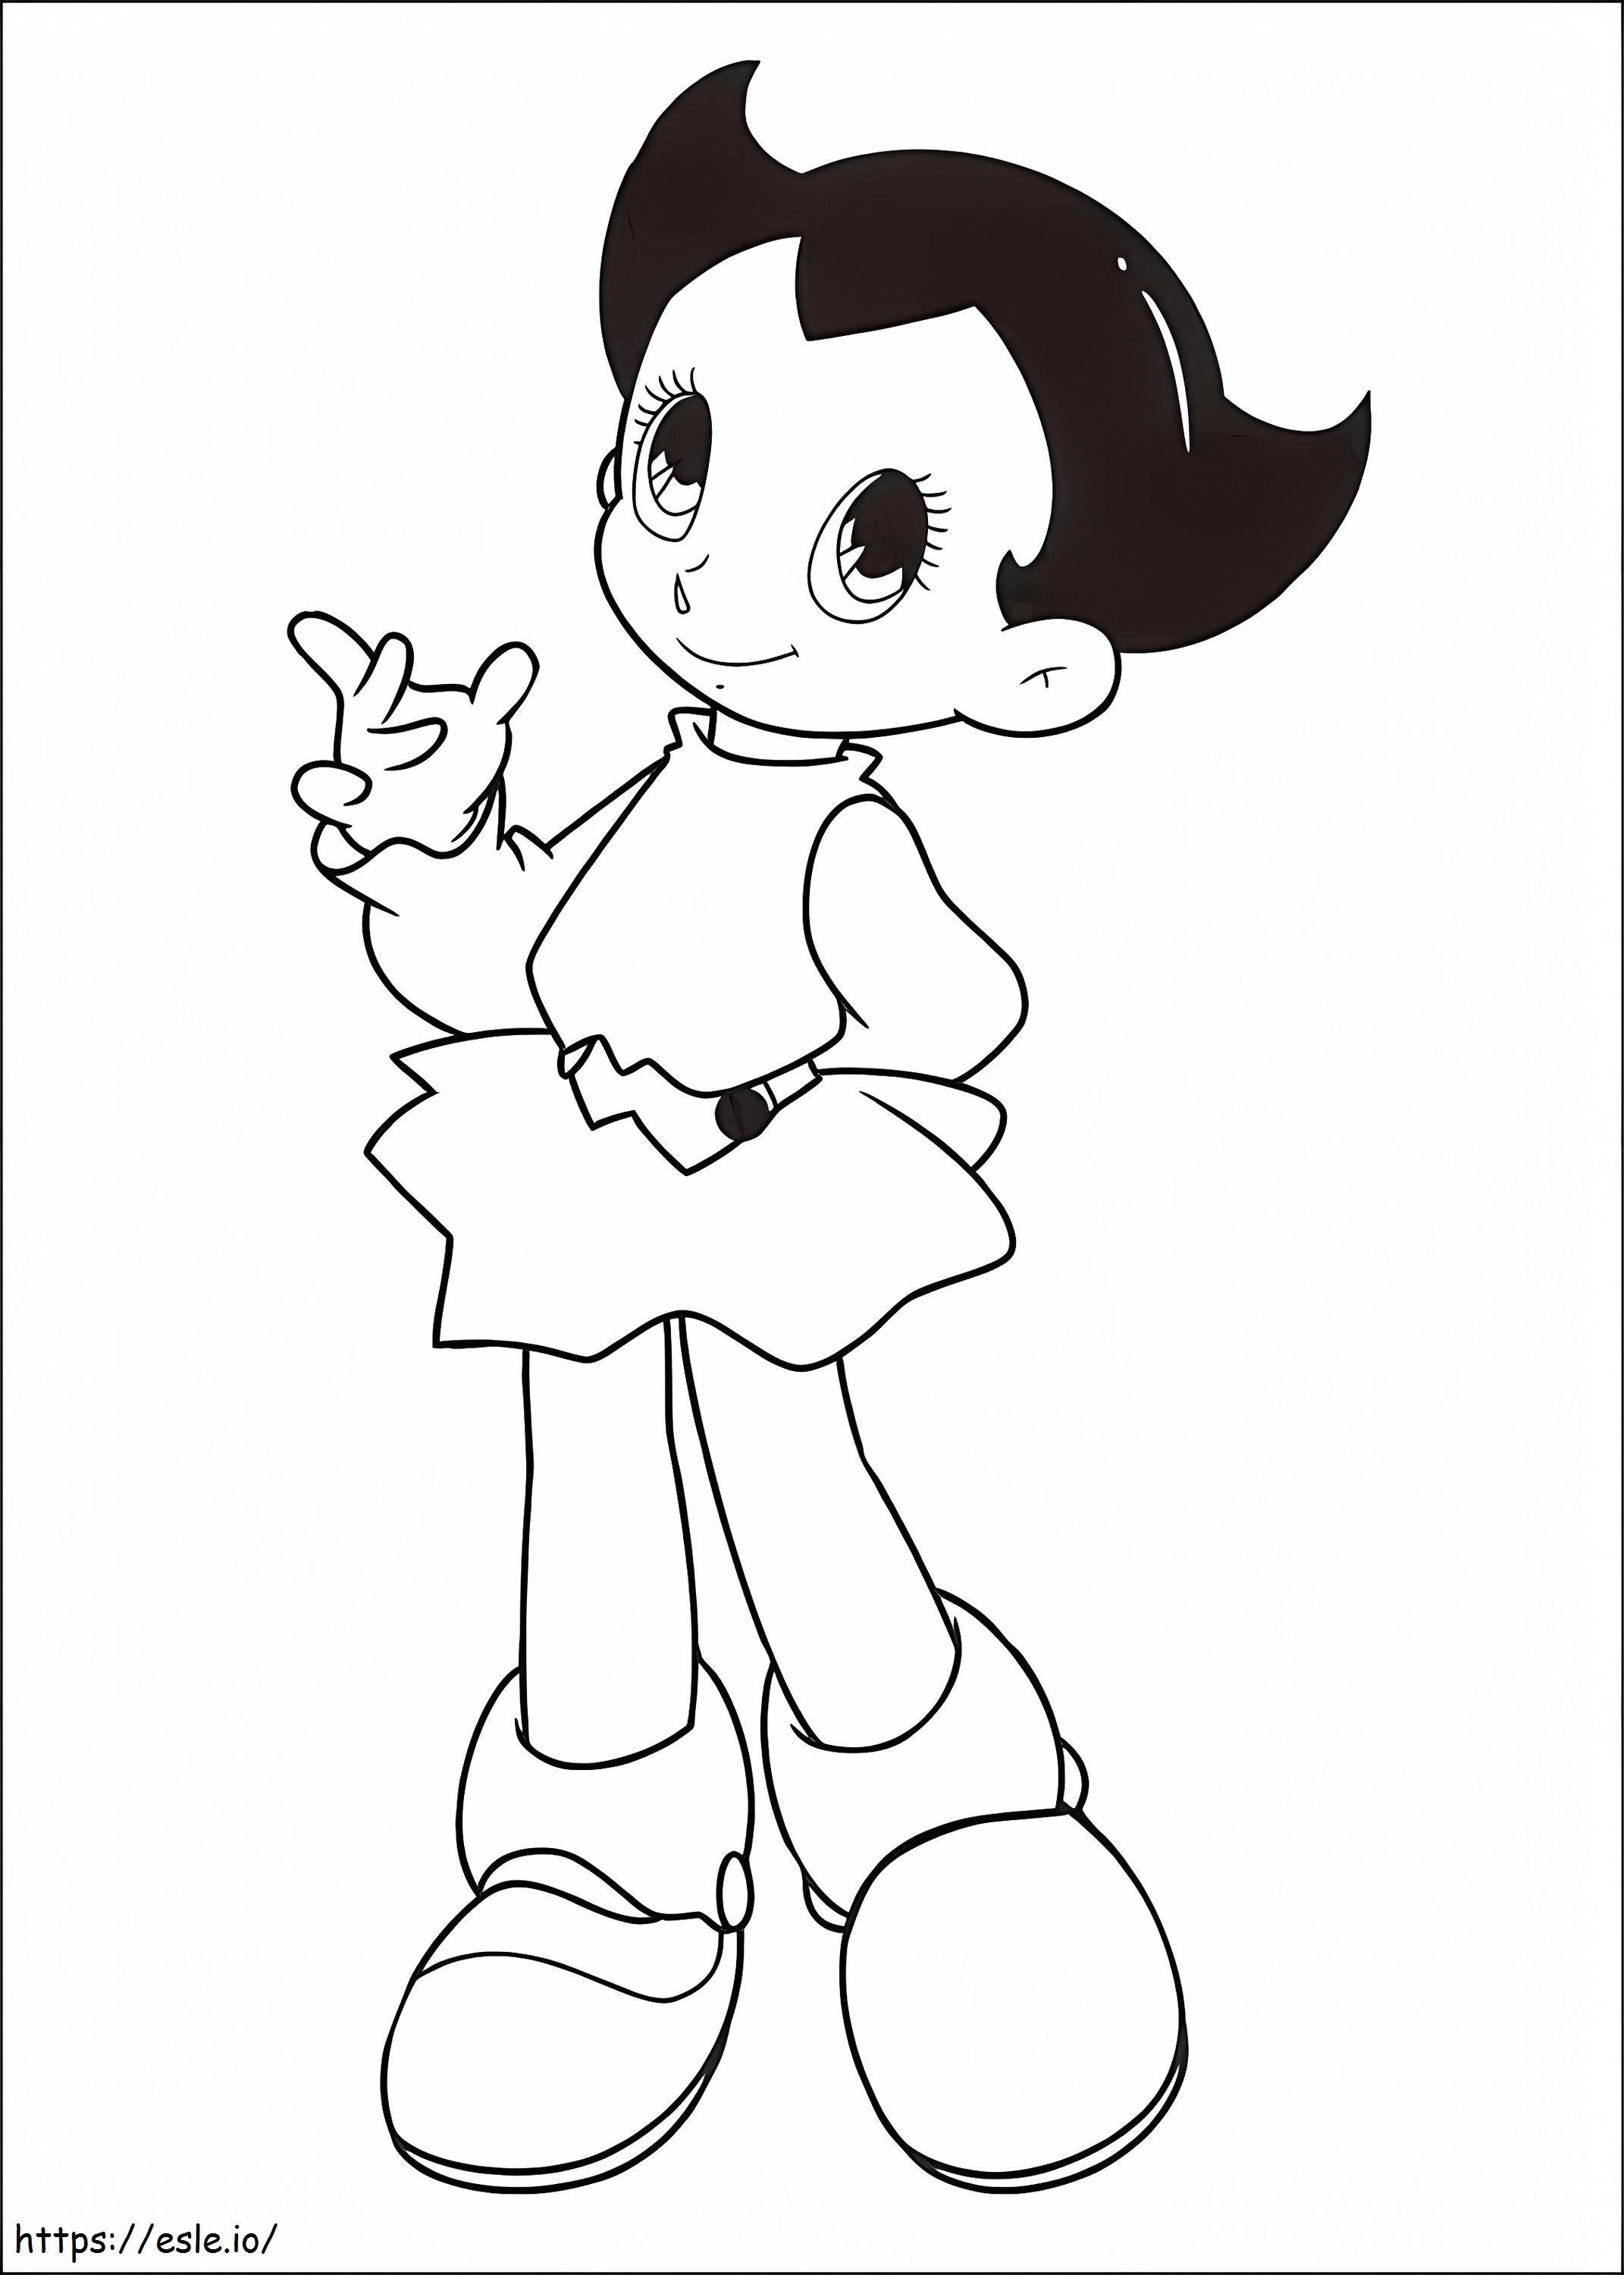 1533605034 Uran From Astro Boy A4 coloring page